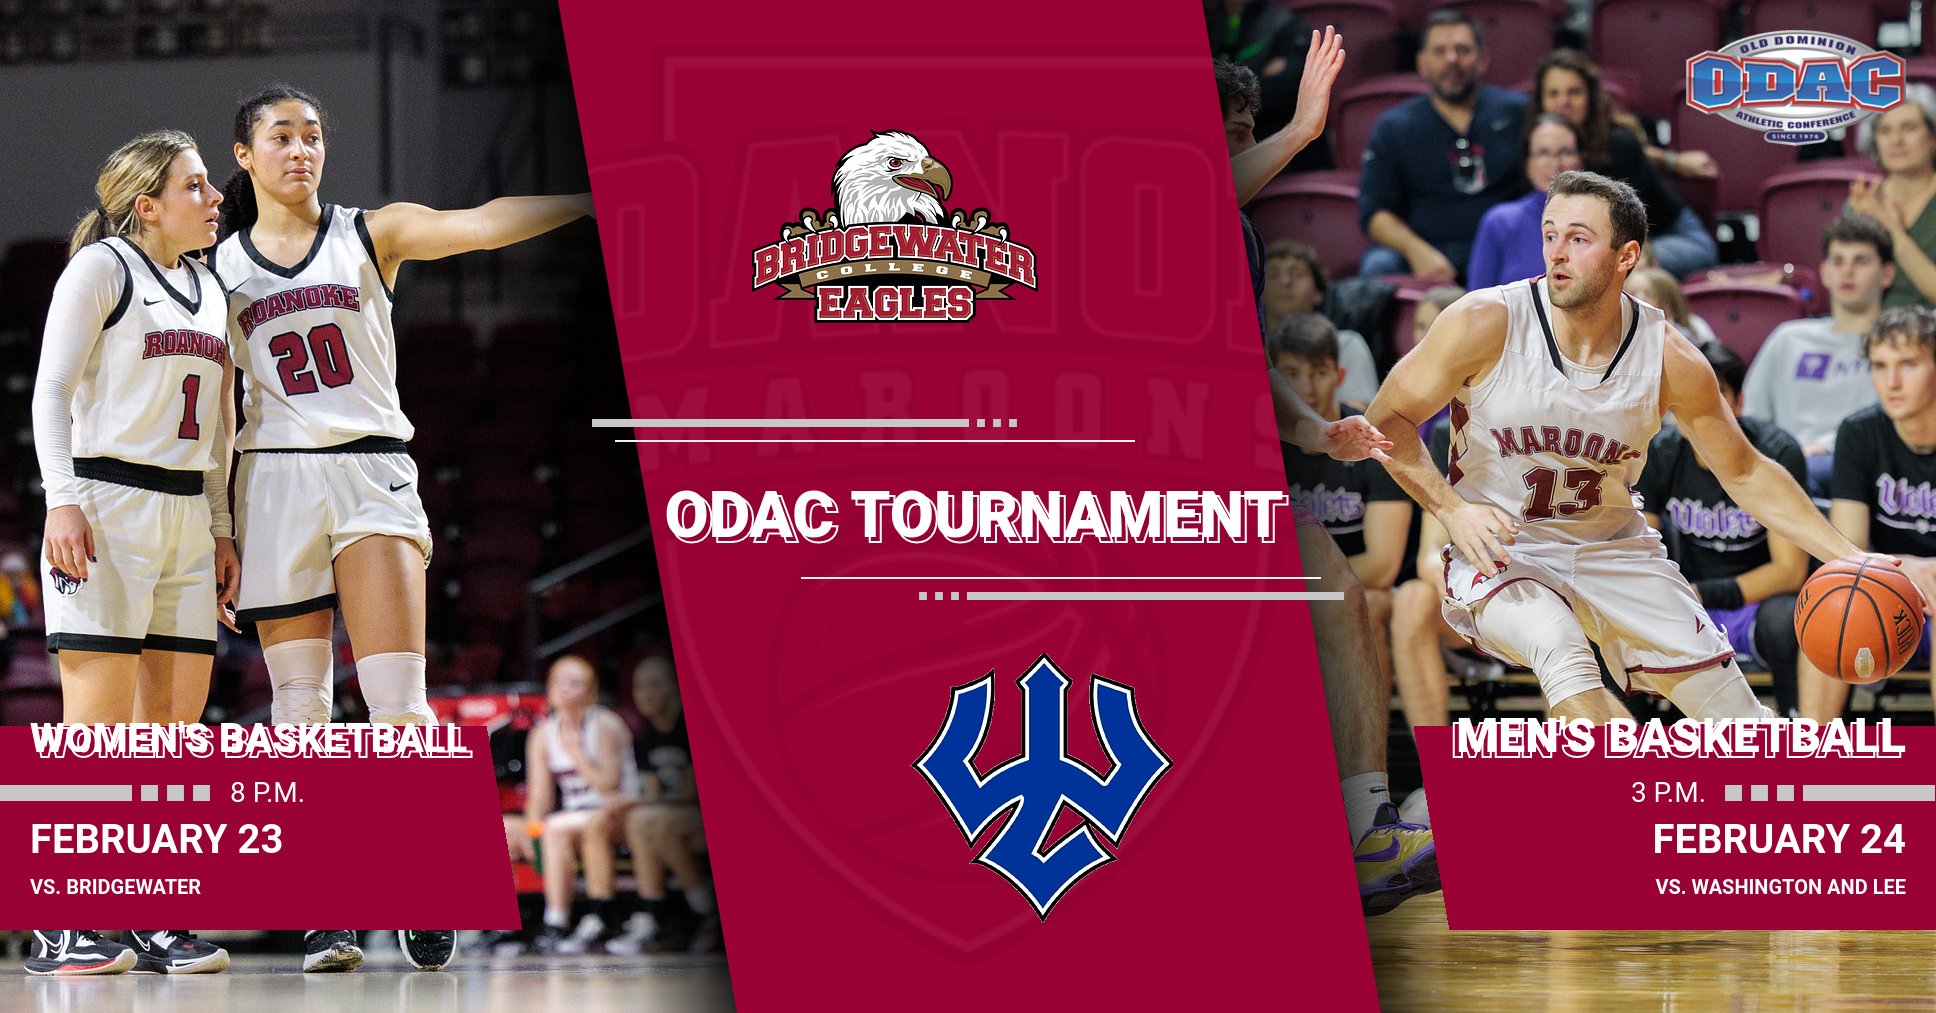 Come Out and Catch the Exciting Maroon Basketball Action at the 2023 ODAC Tournament